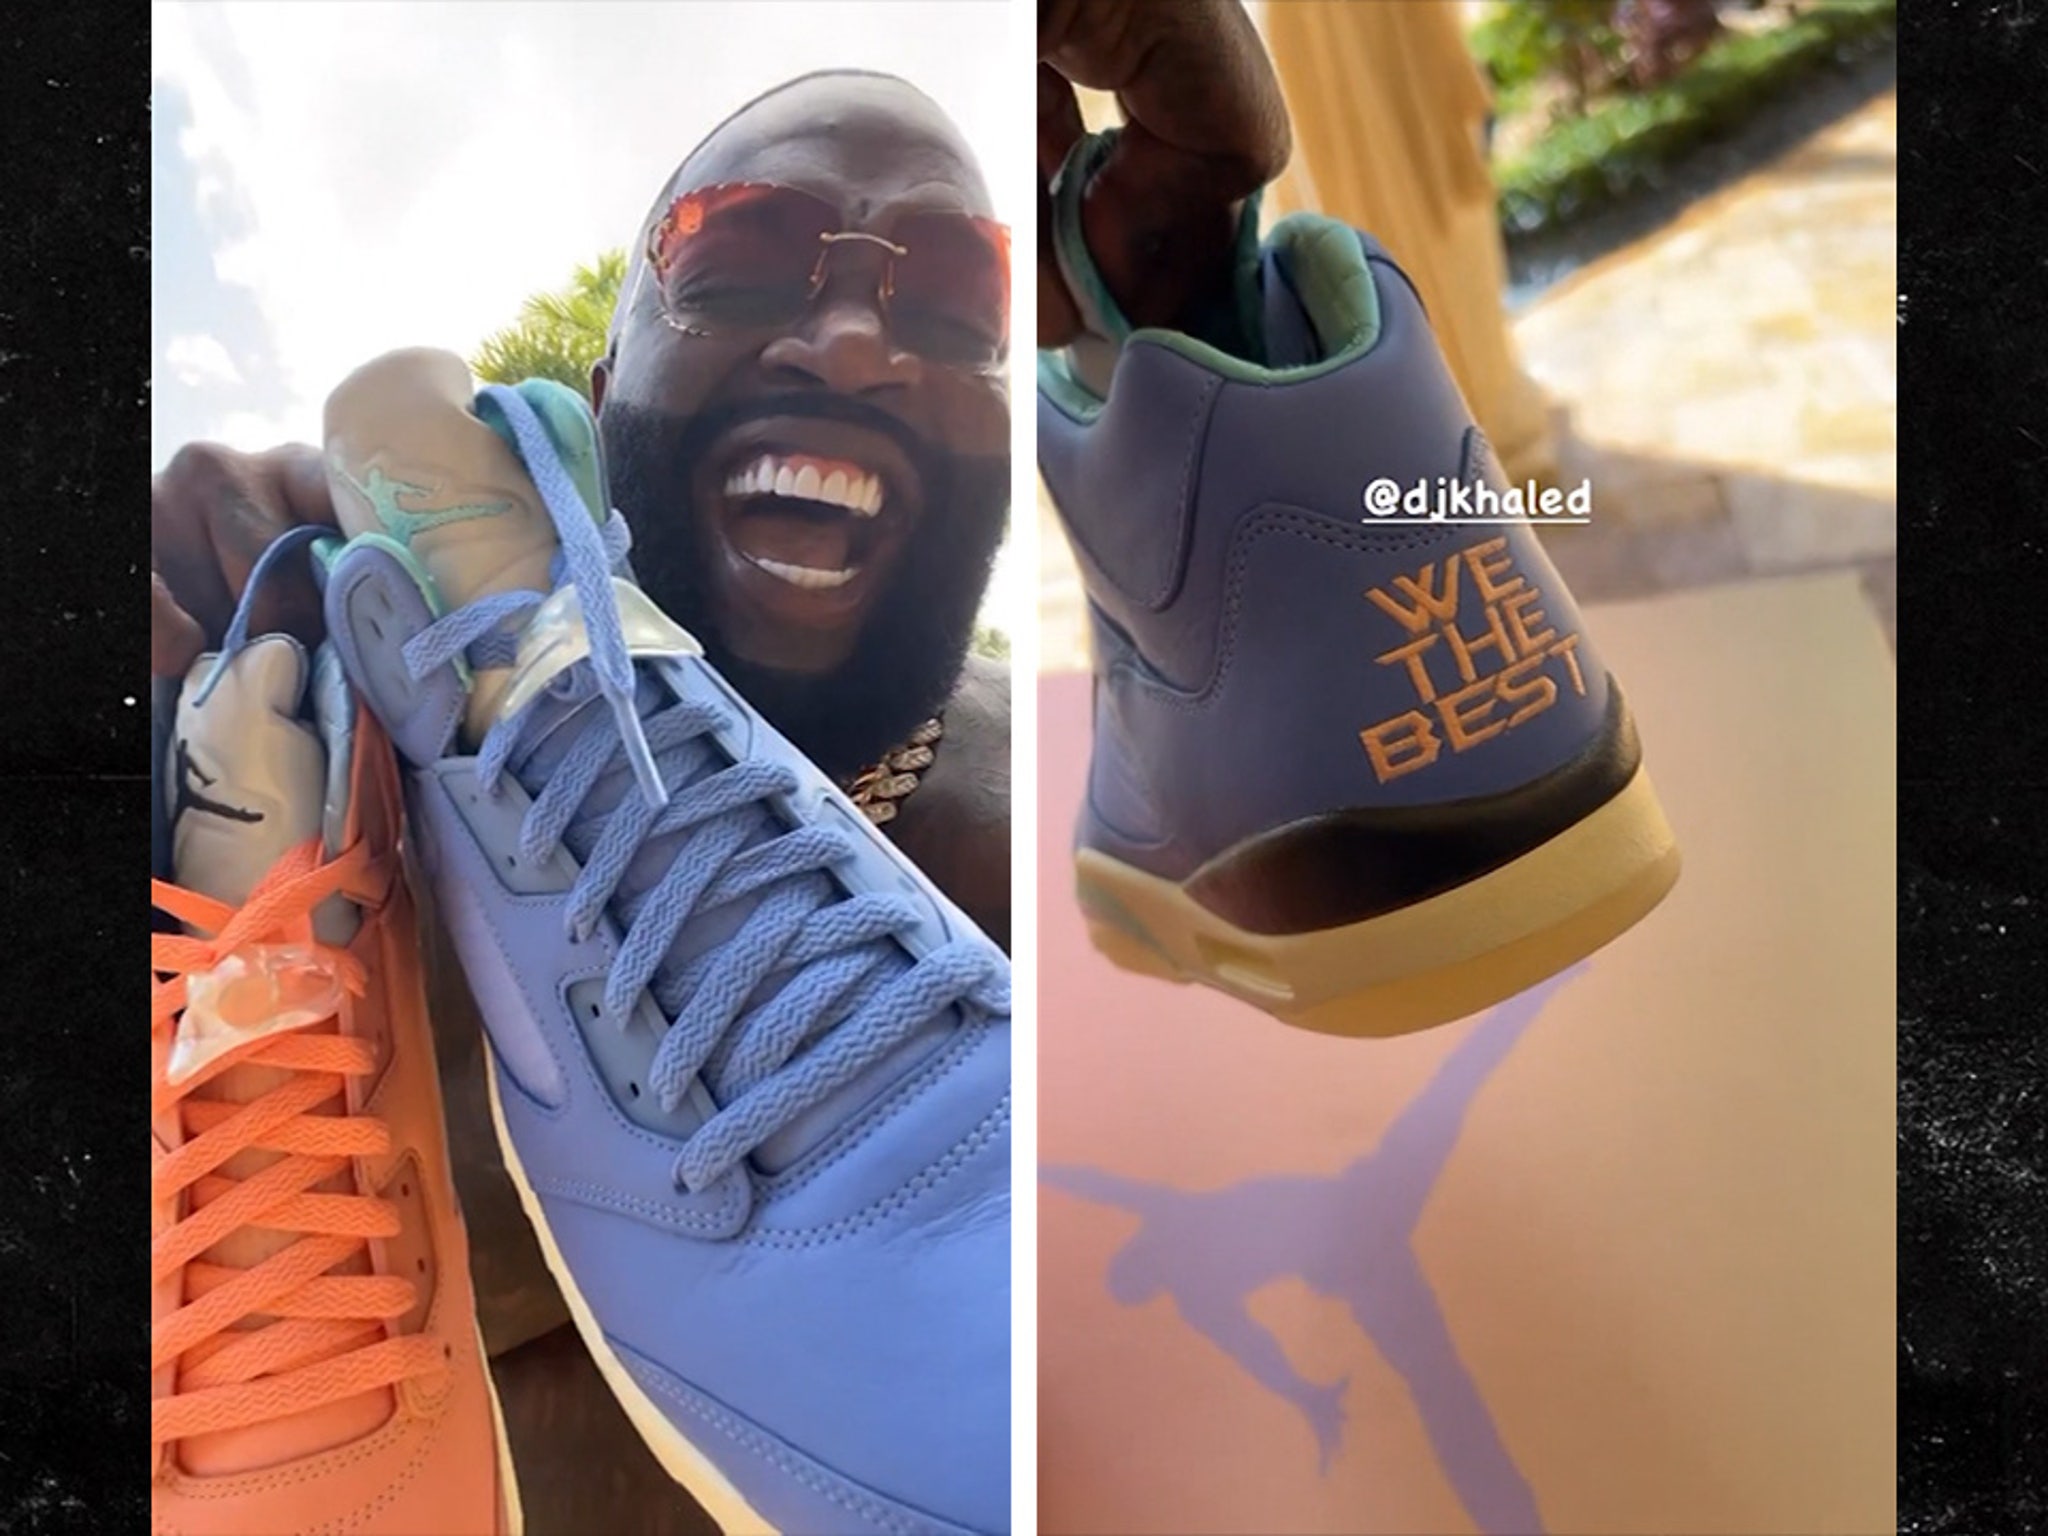 DJ Khaled Jordan 5 - first look of the collection